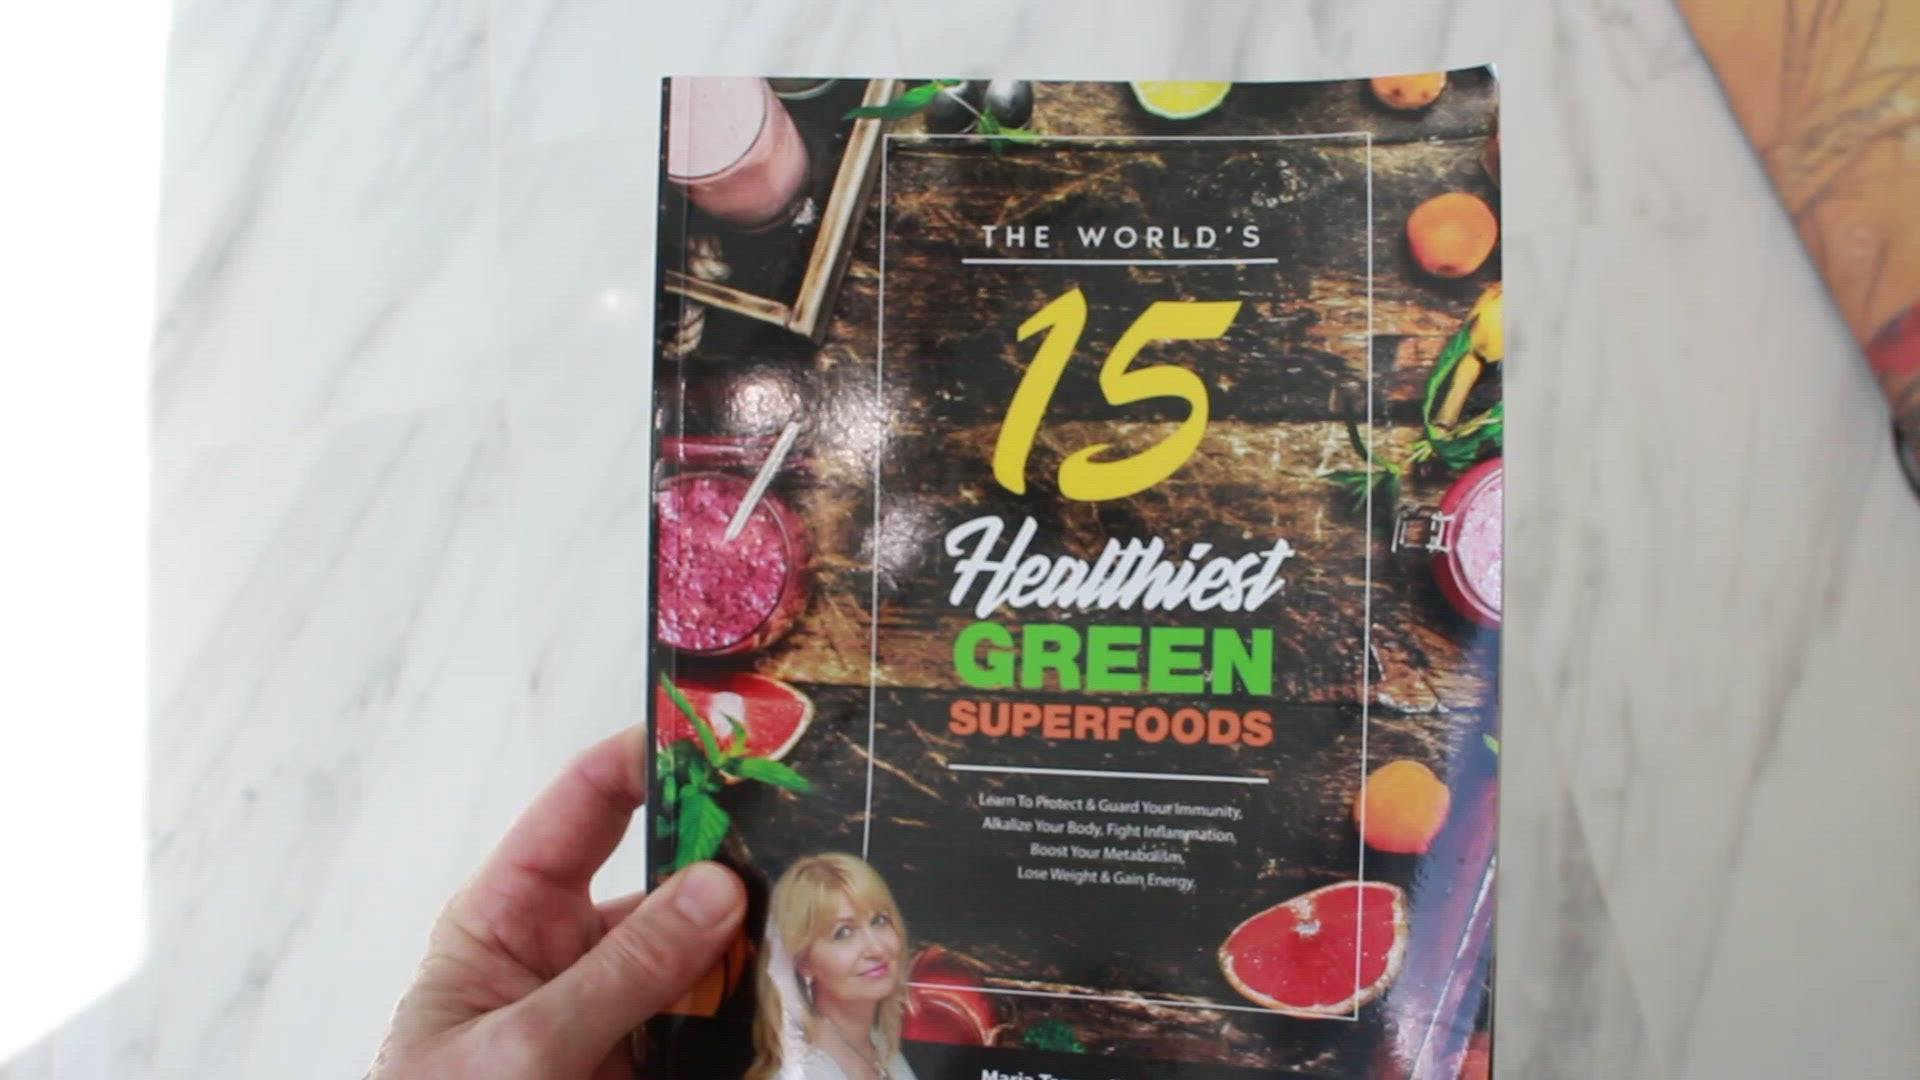 The World's 15 Healthiest Green Superfoods ebook